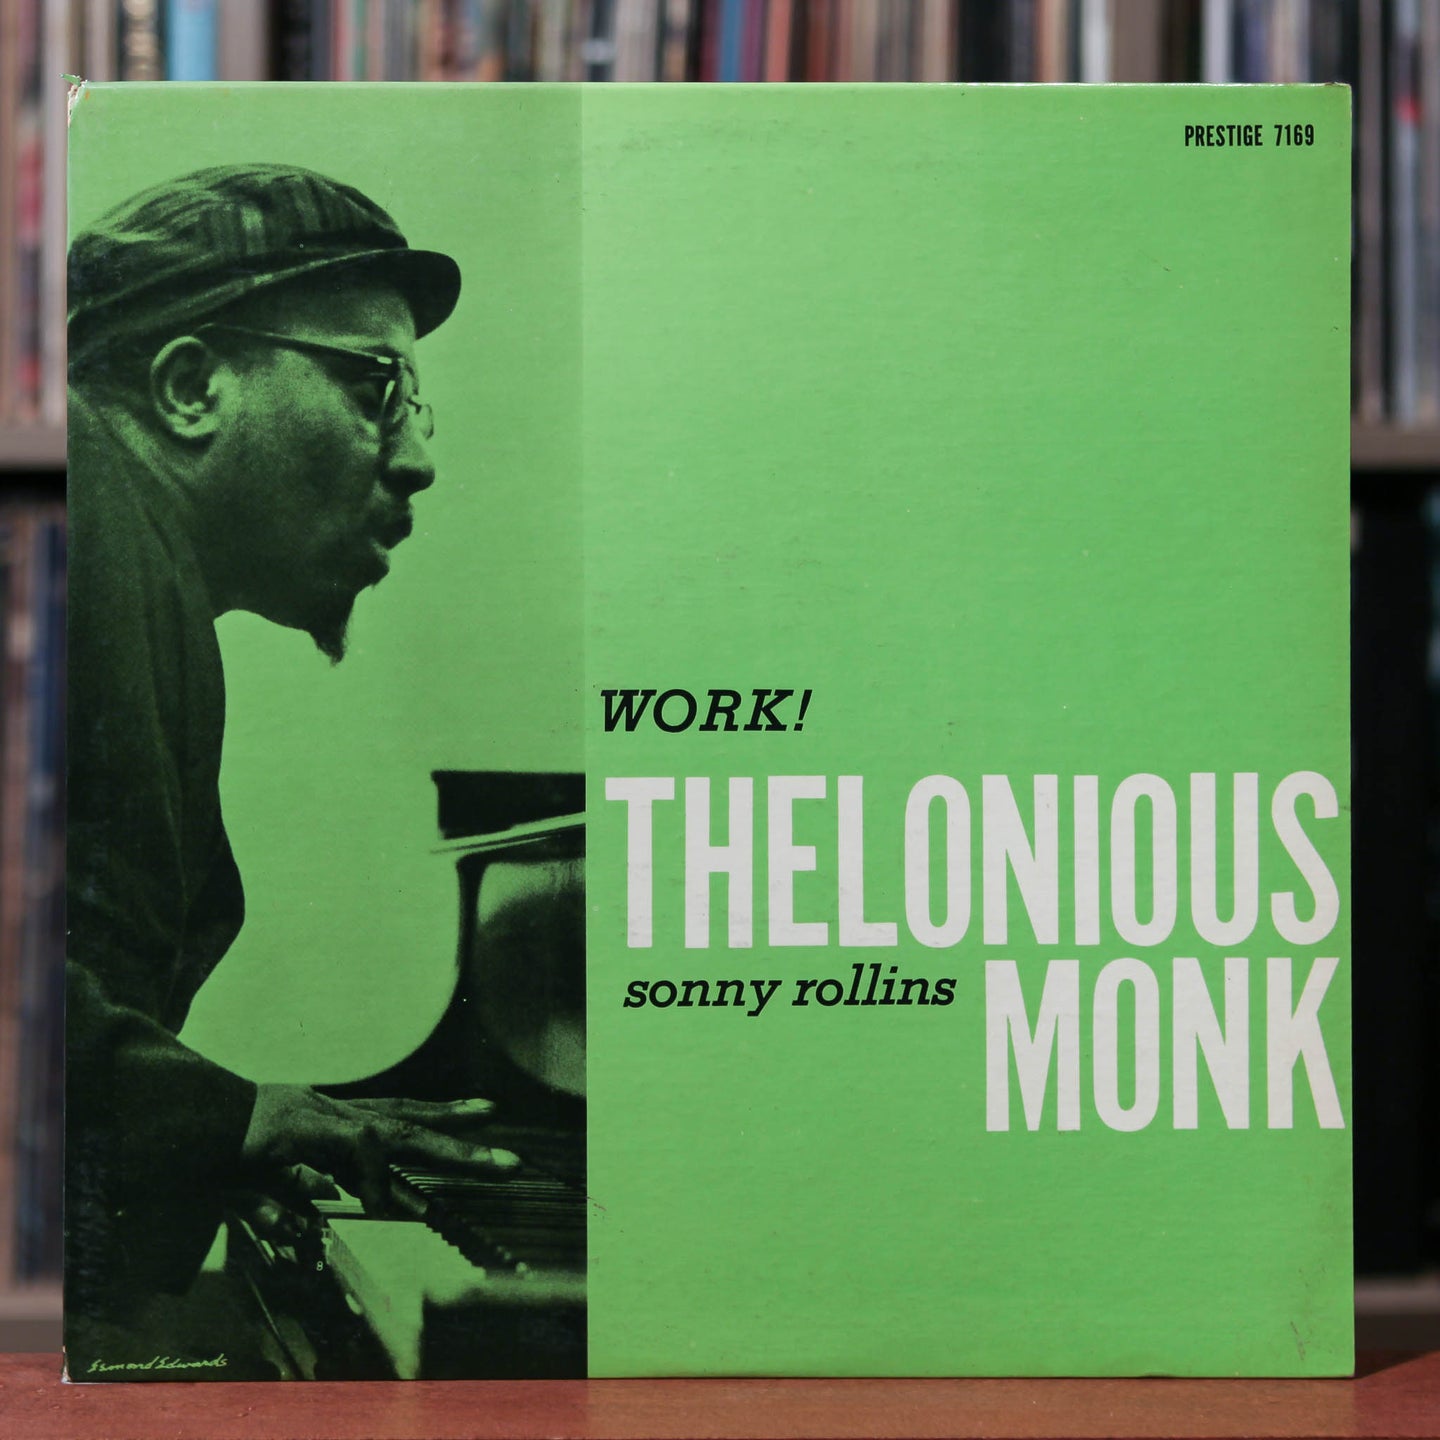 Thelonious Monk - with Sonny Rollins - Work! - 1959 Prestige VG+/VG+